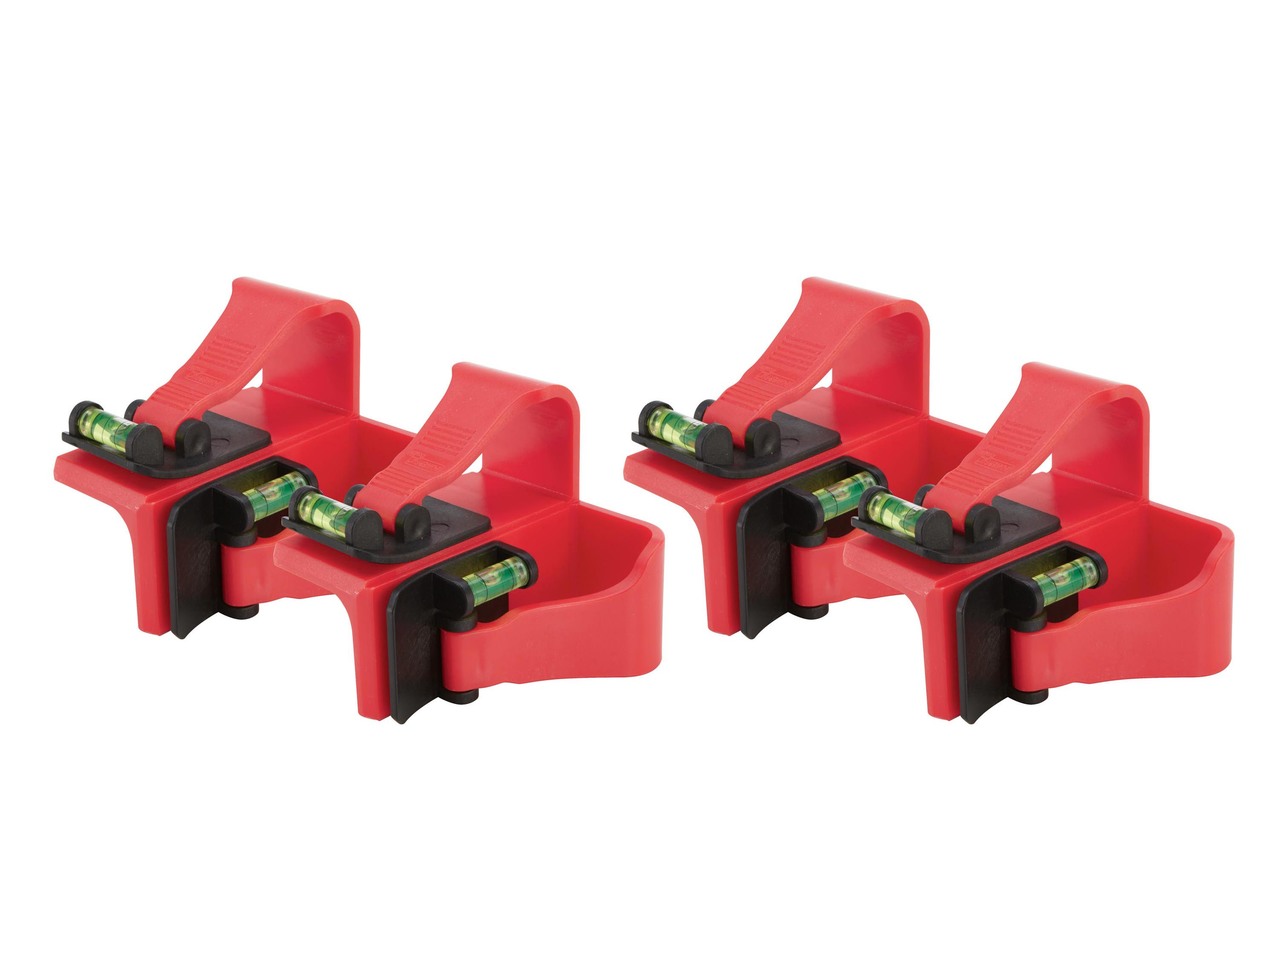 Corner Clamps or One-Handed Clamps, 4 pieces